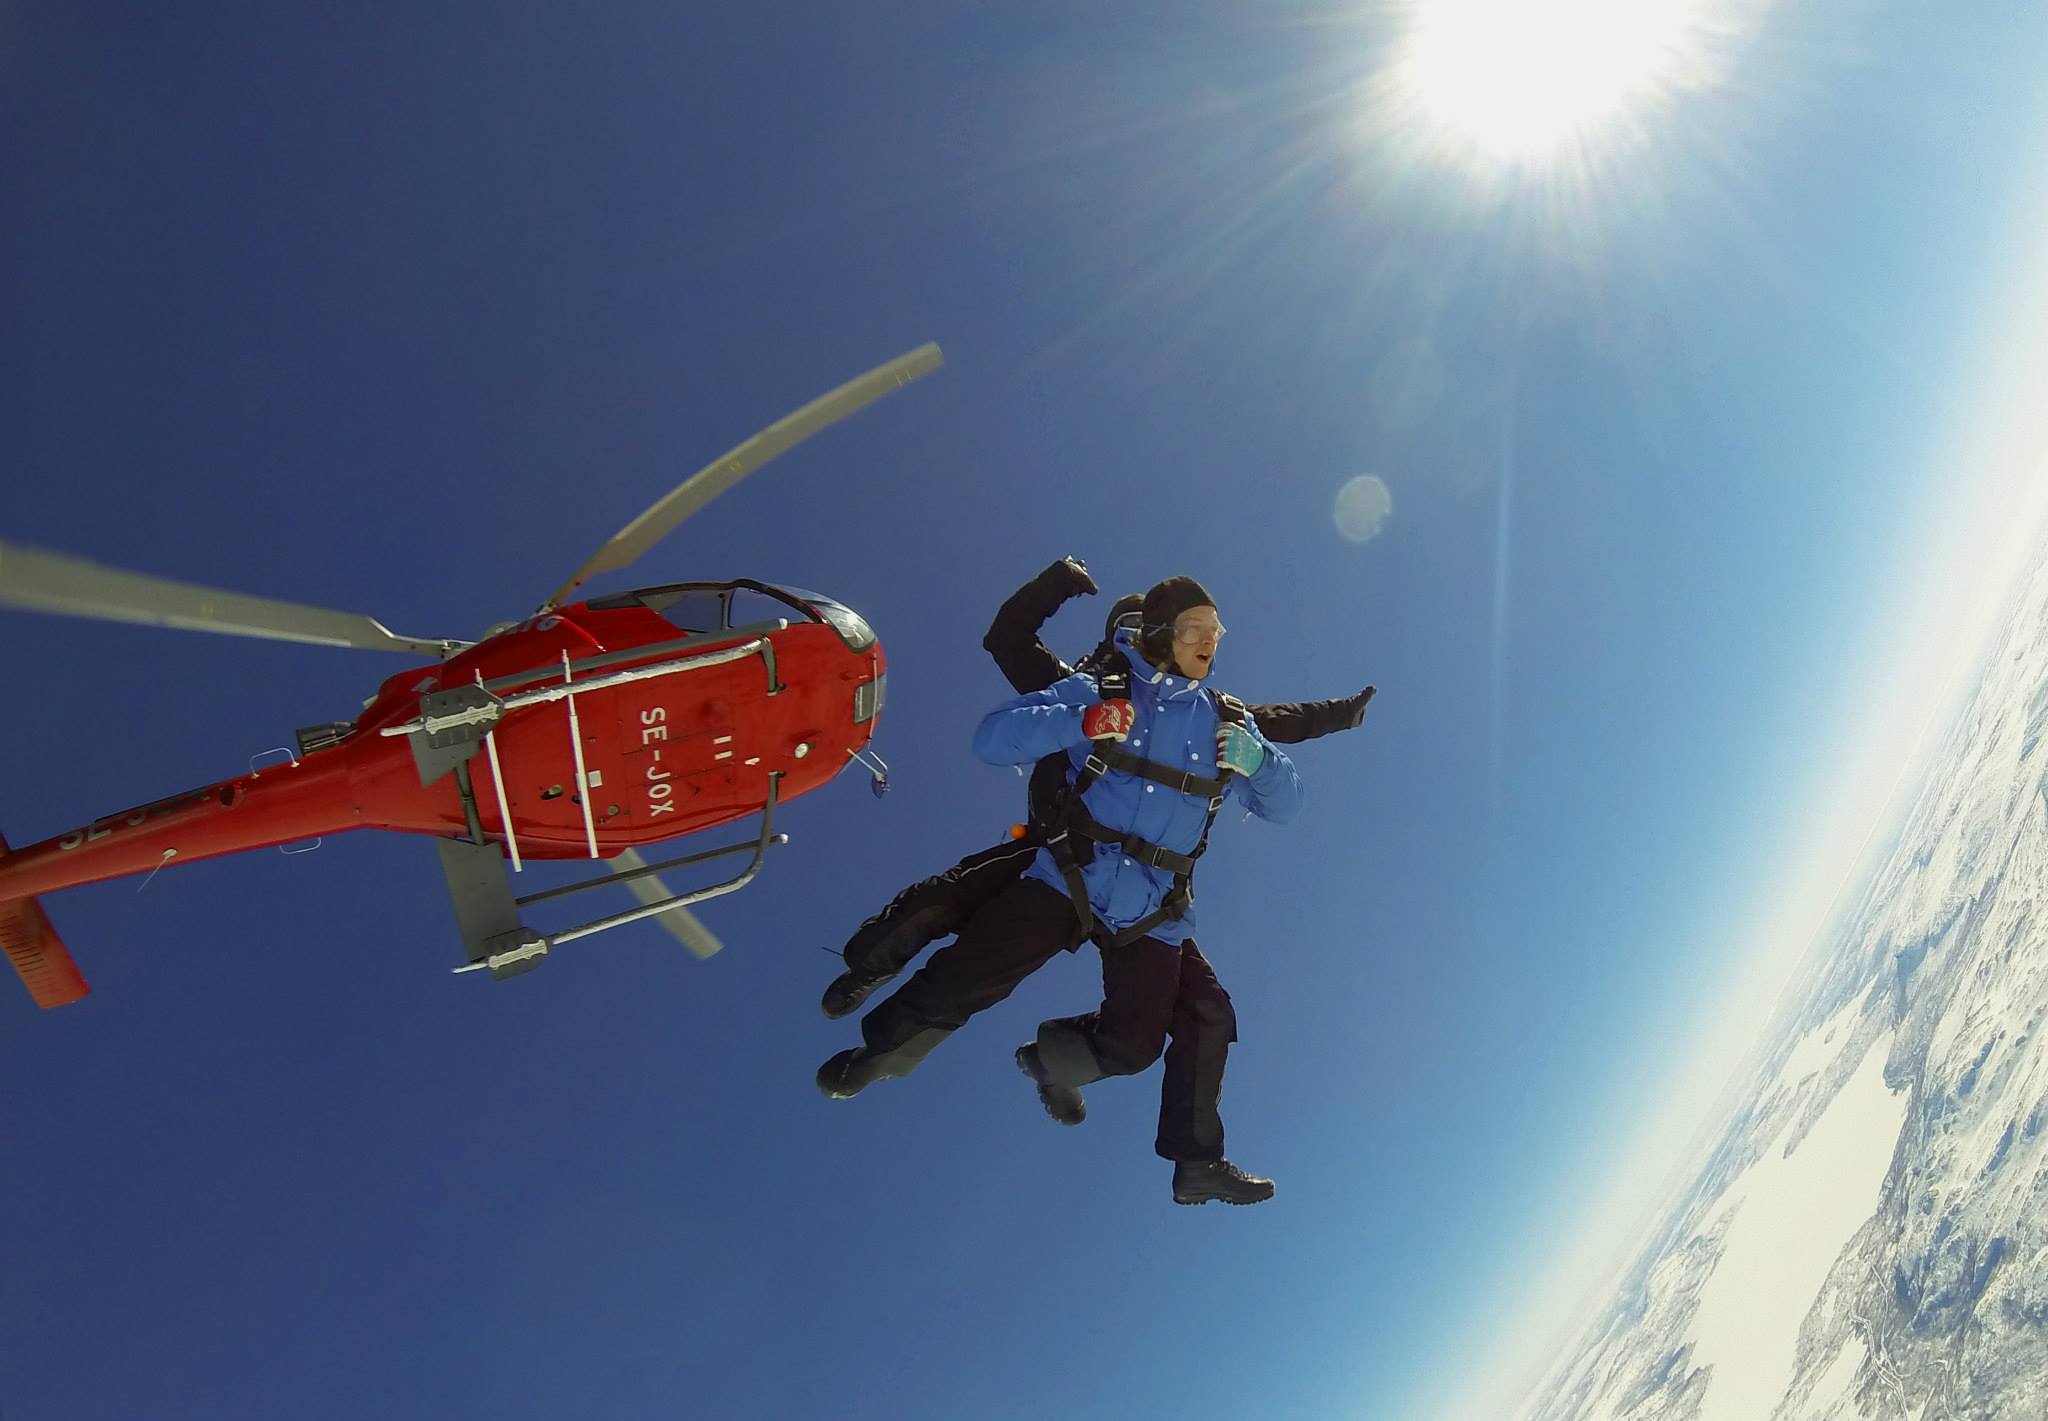 How to Skydive from a Helicopter - Adventure Herald